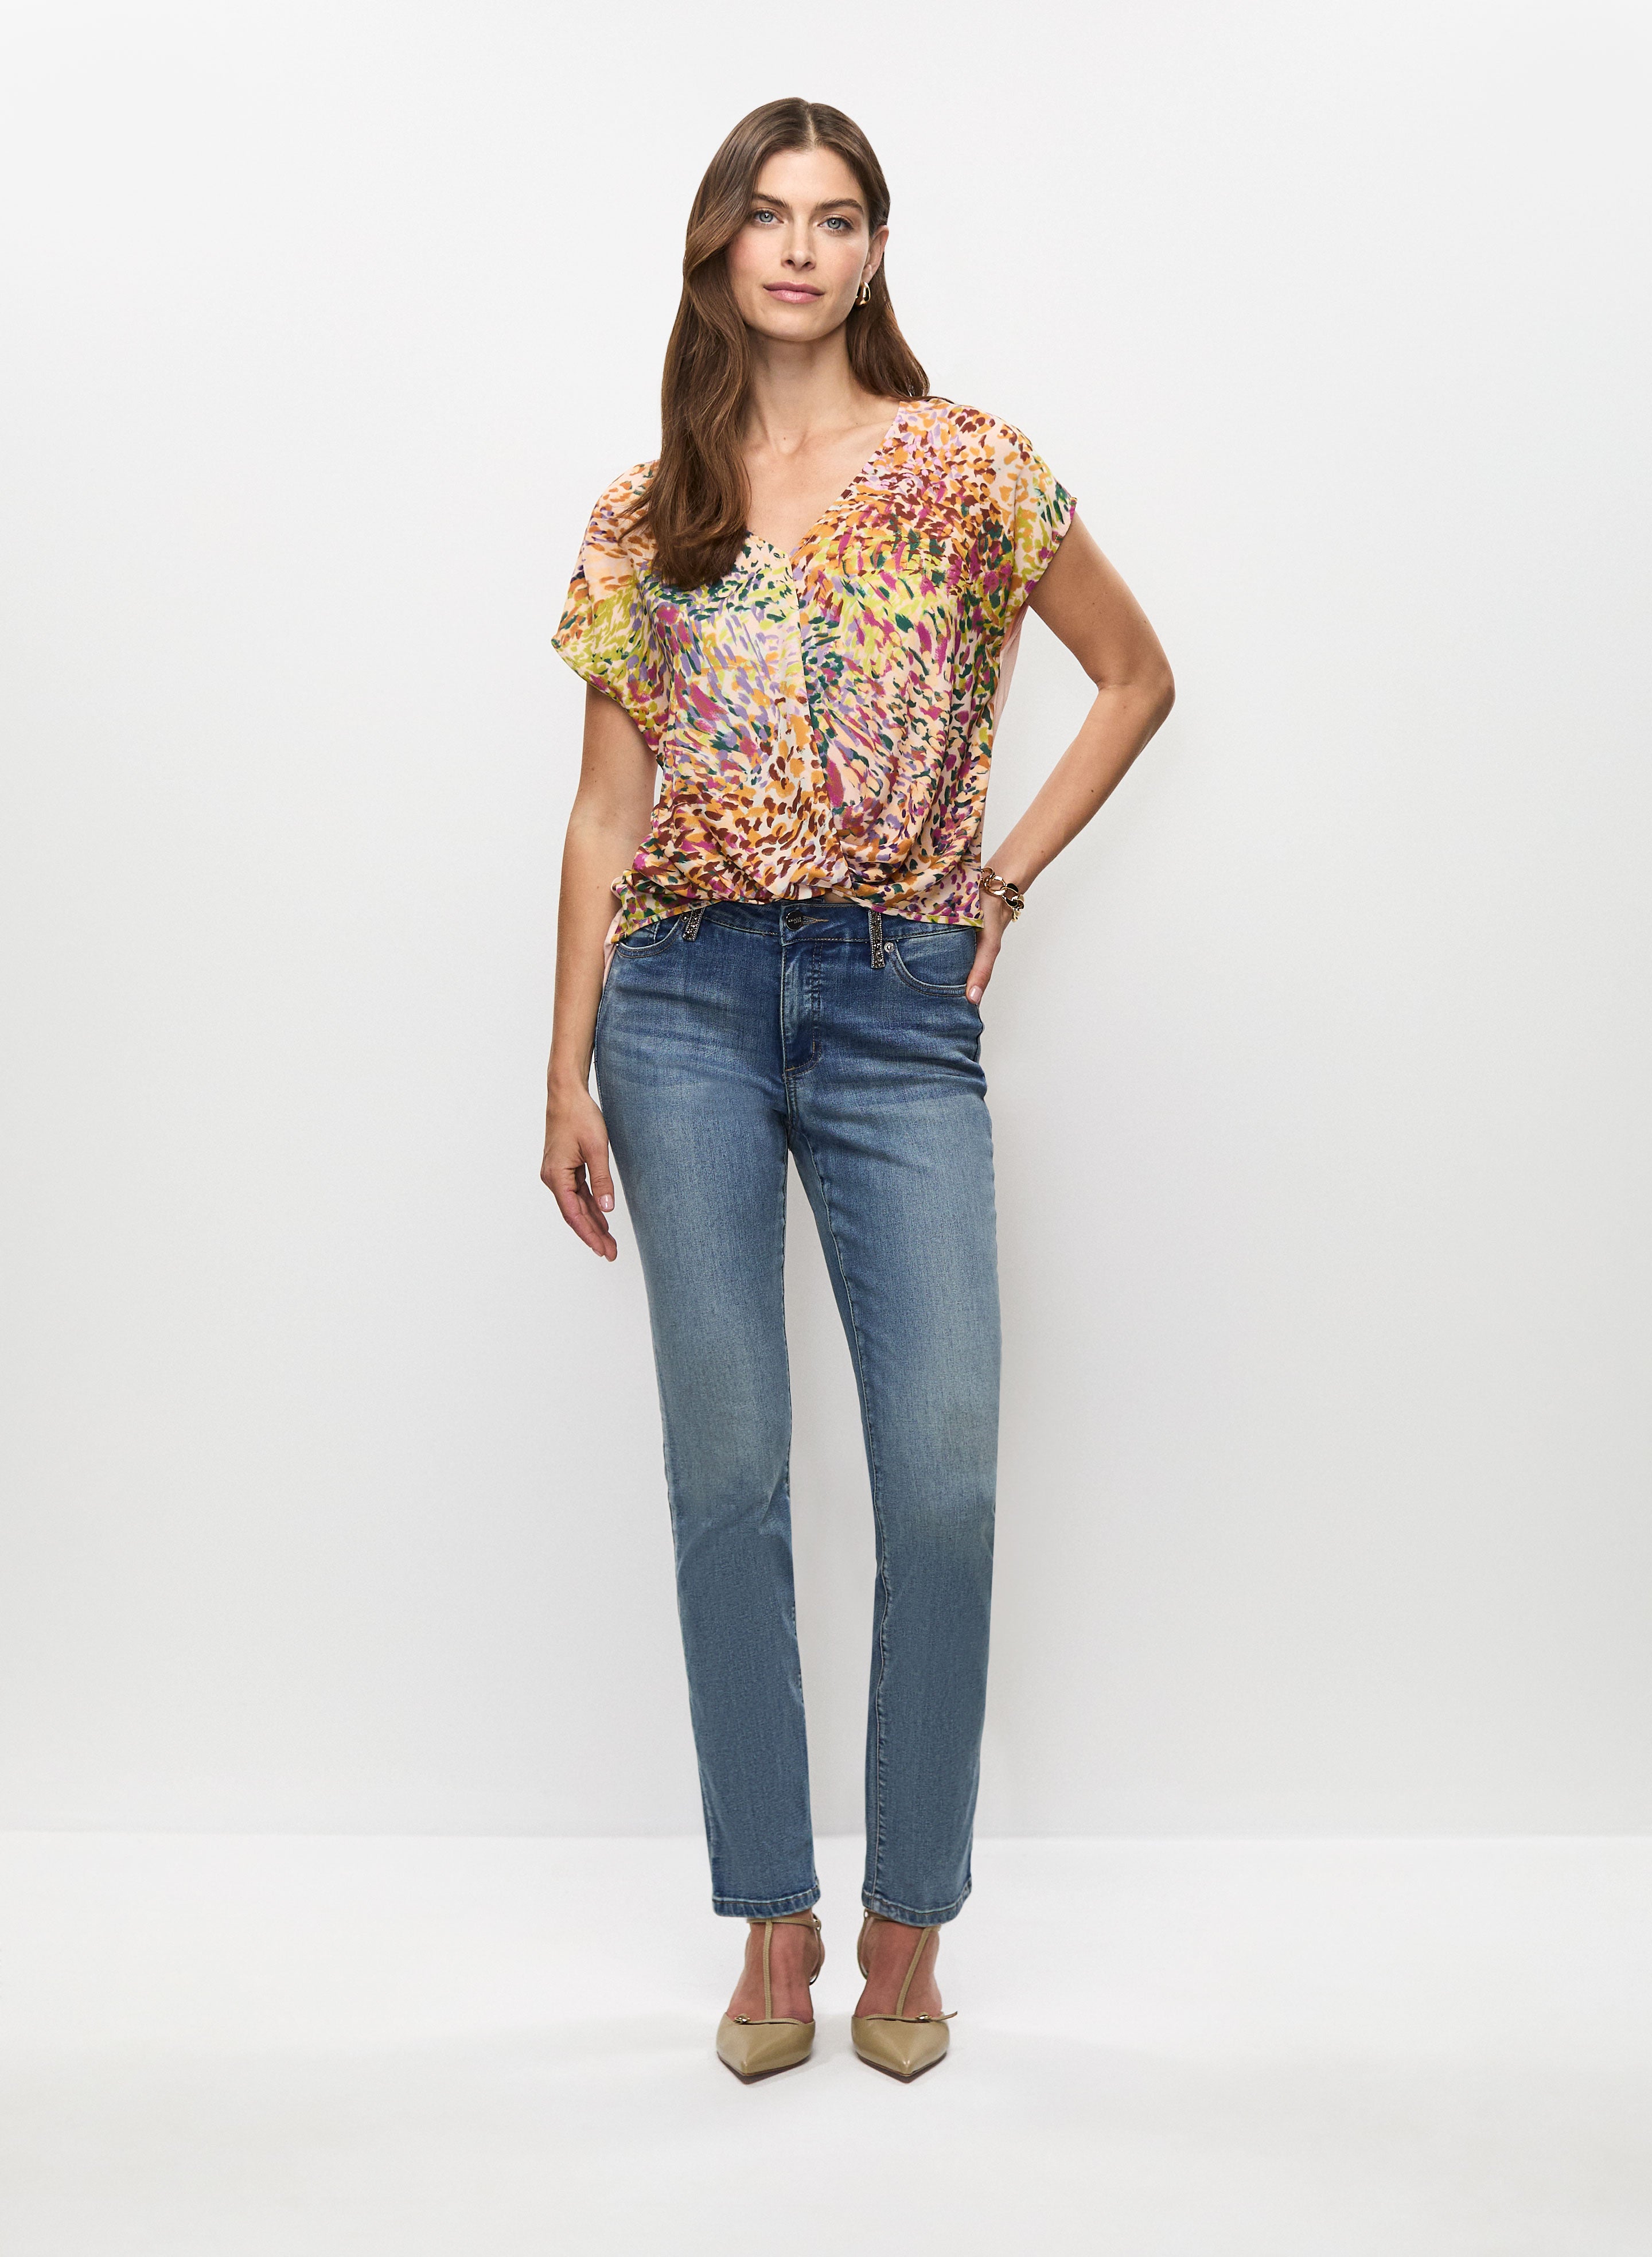 Printed Wrap-Style Top & Straight Leg Jeans